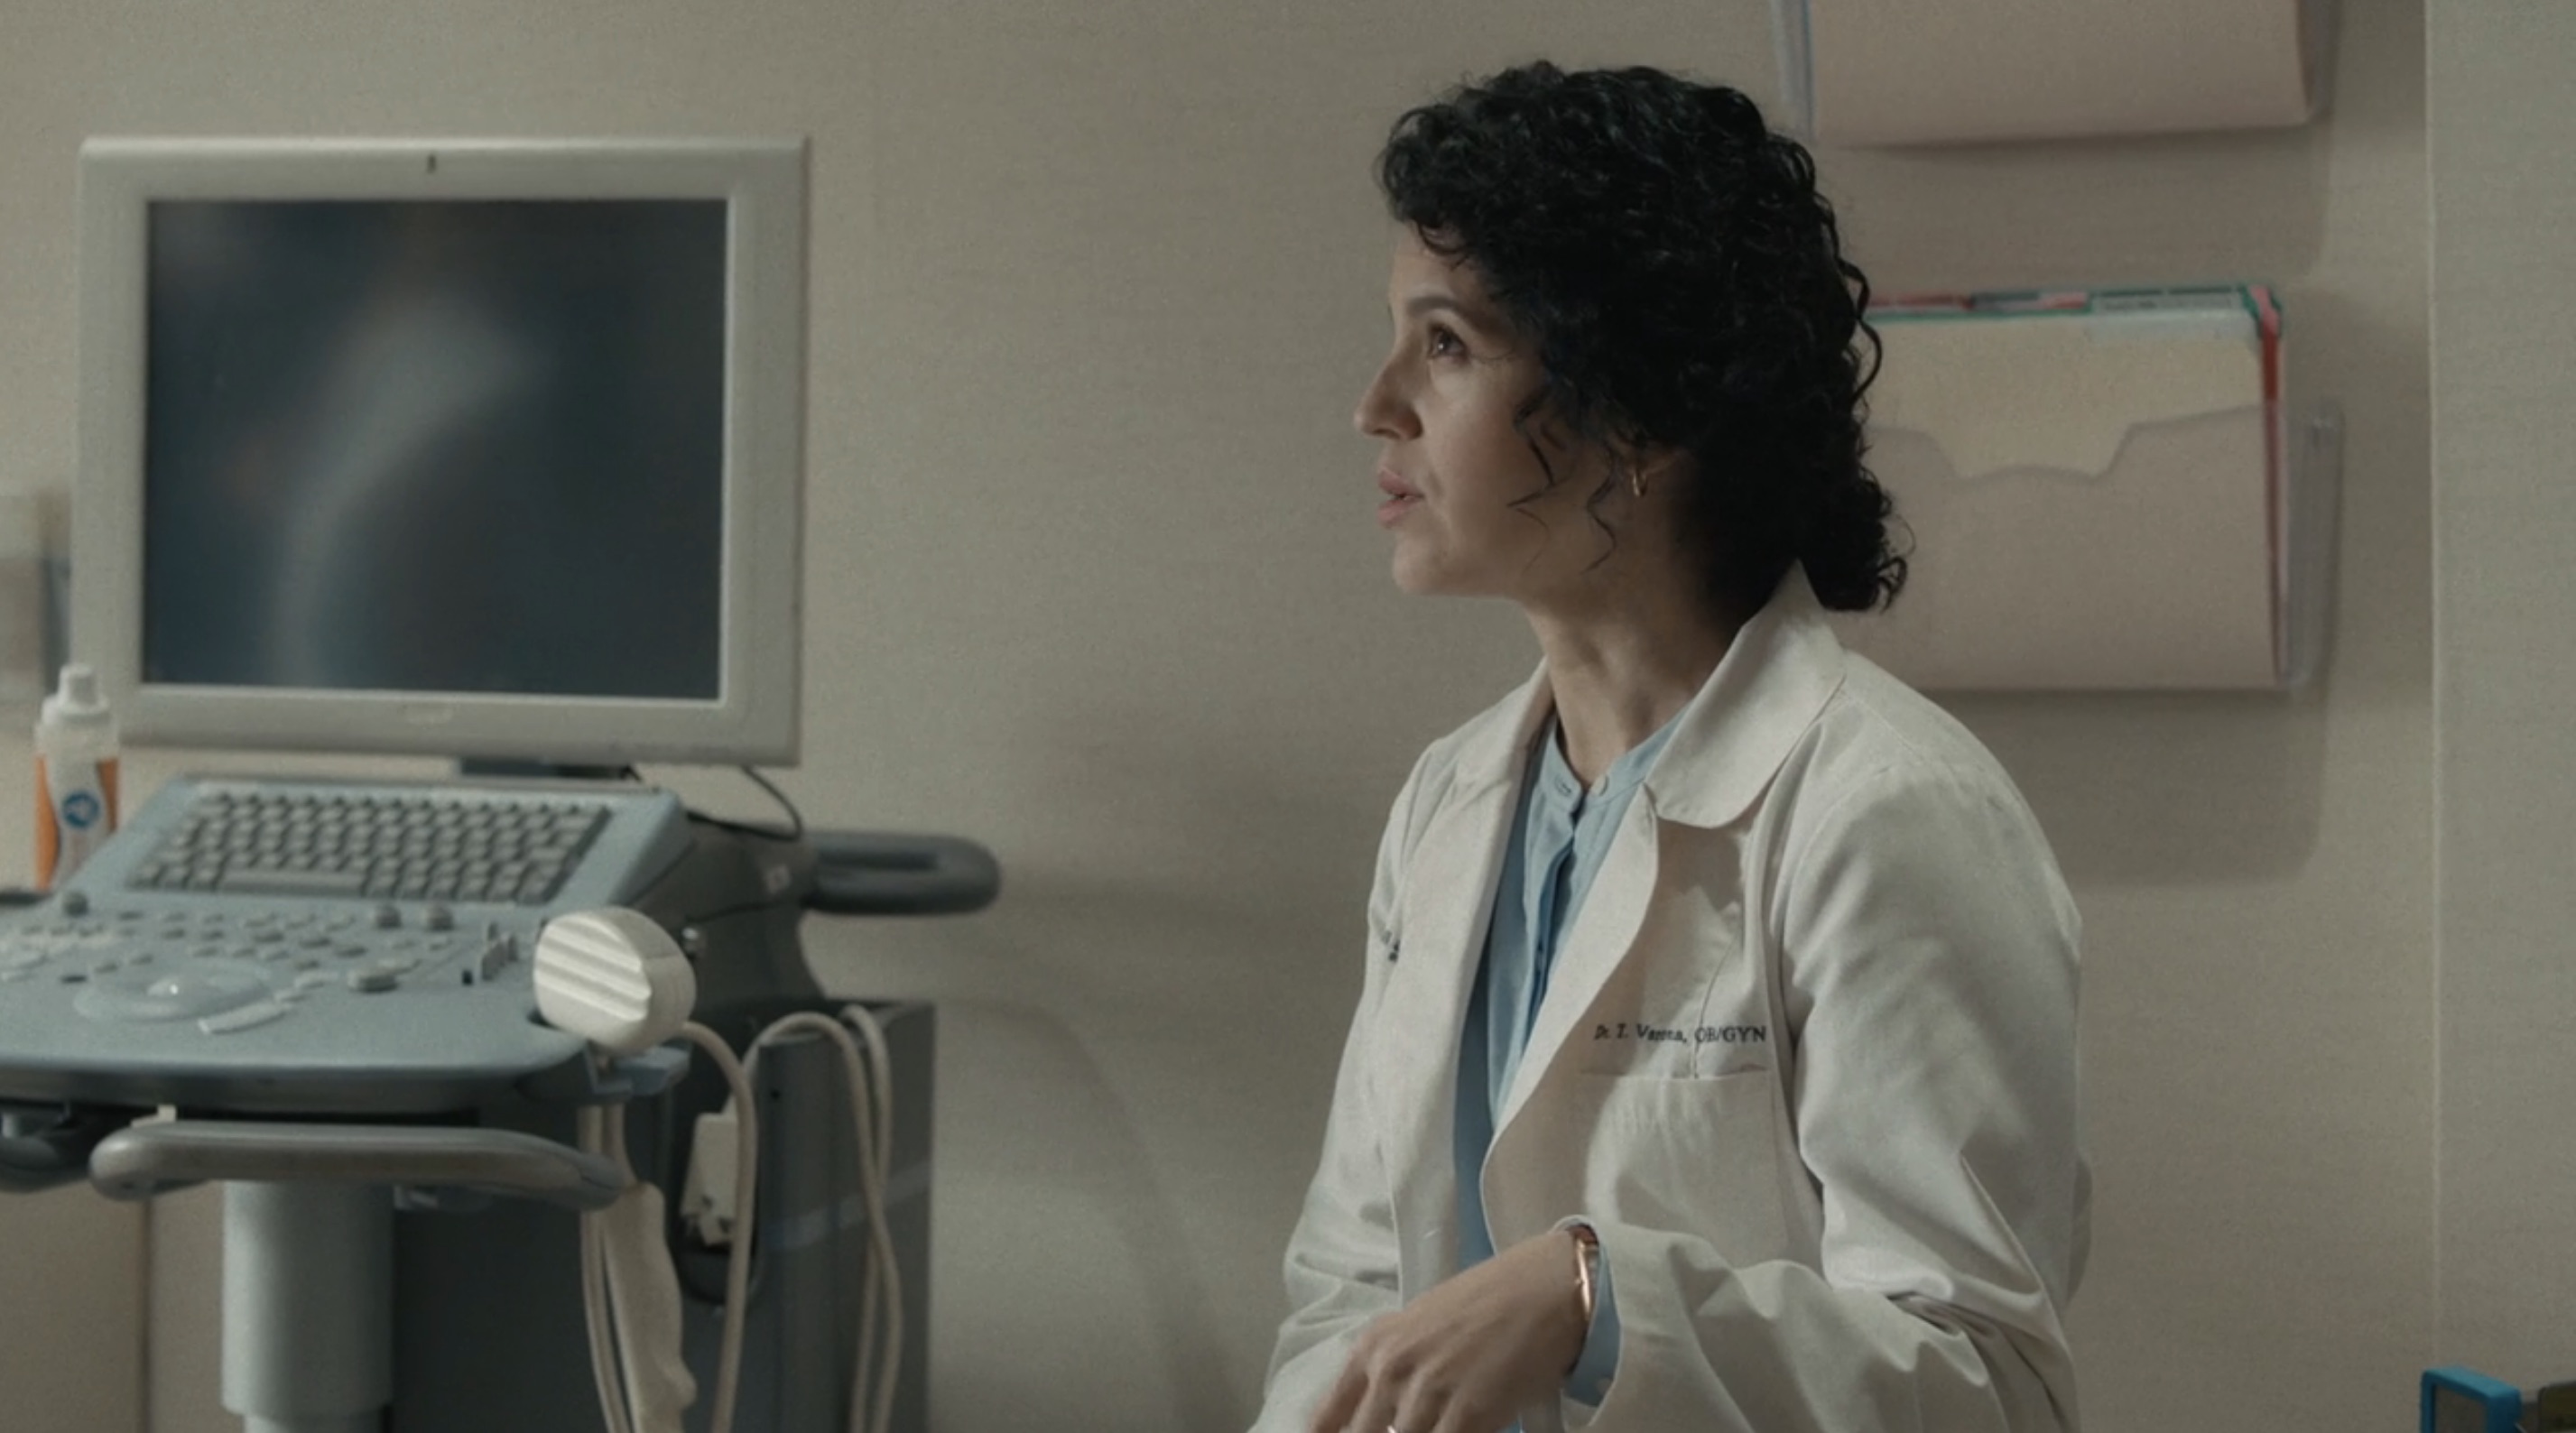 Scenes from a Marriage Cast on HBO - Shirley Rumierk as Dr. Varona